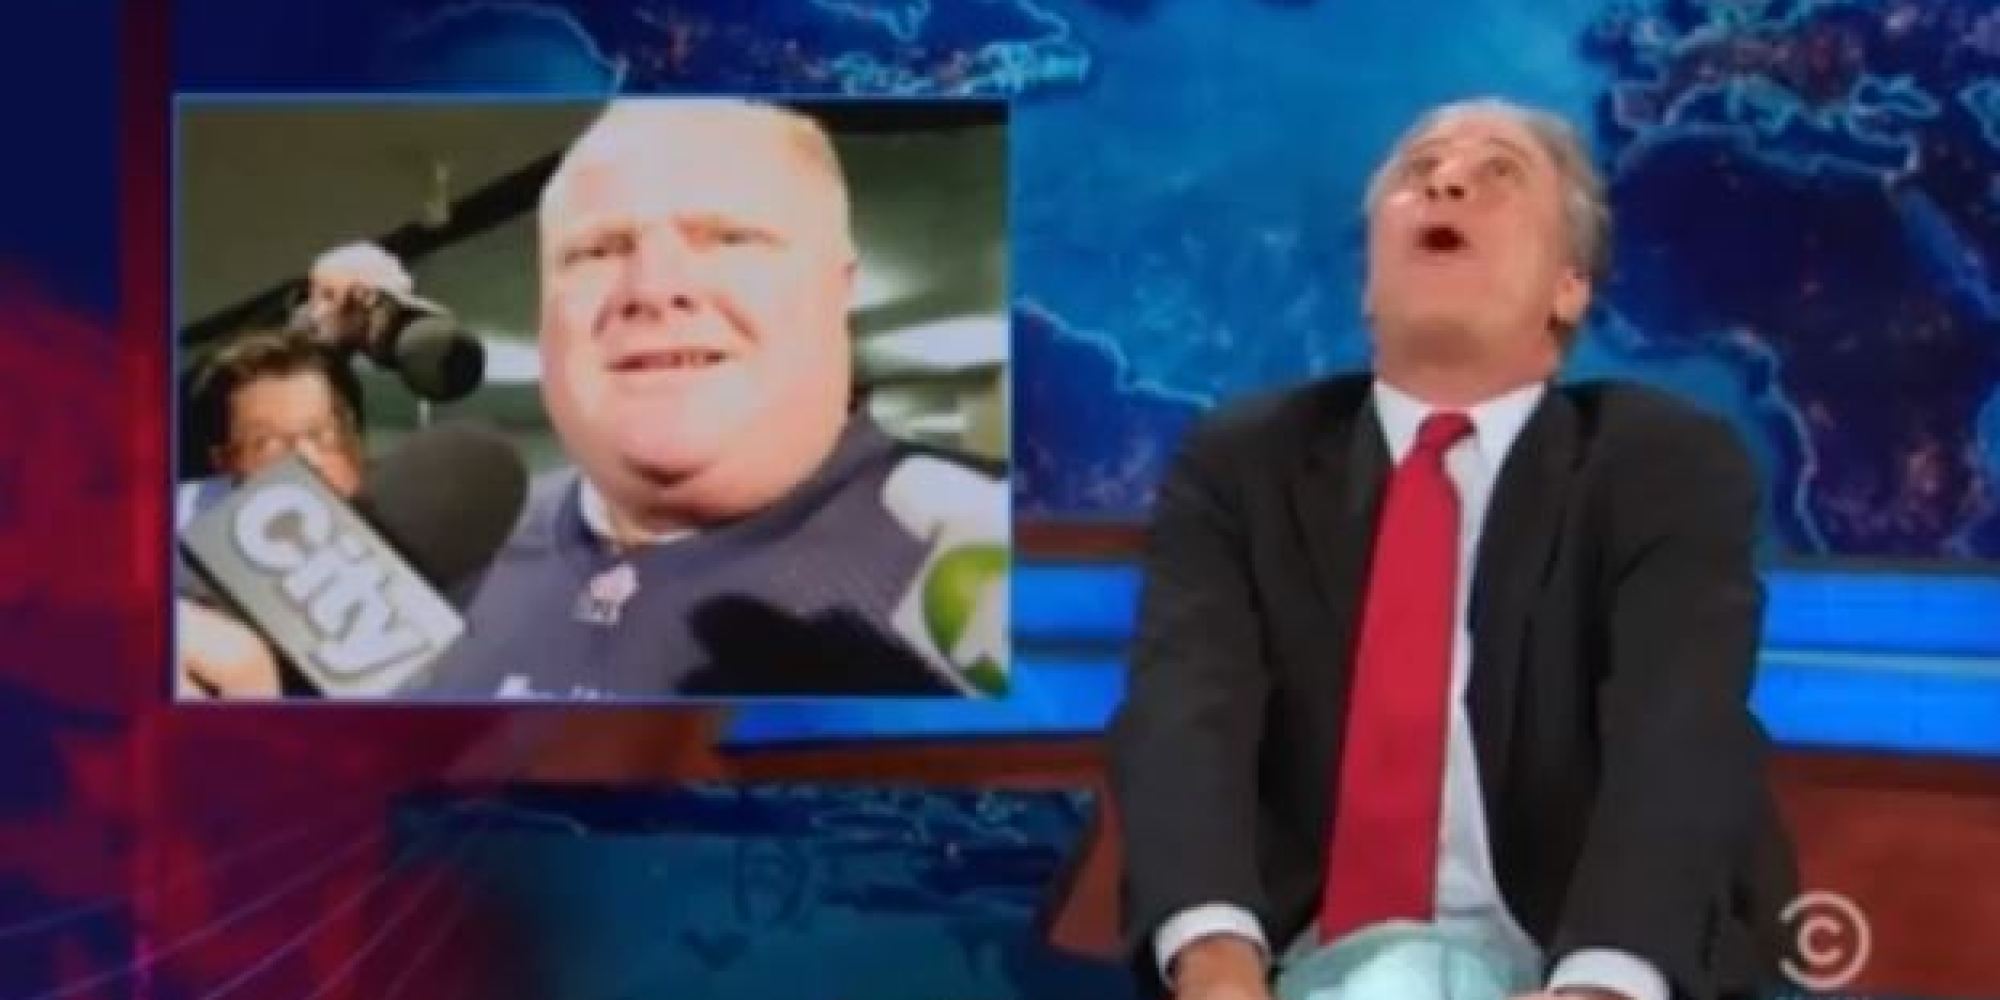 Rob ford on daily show #7